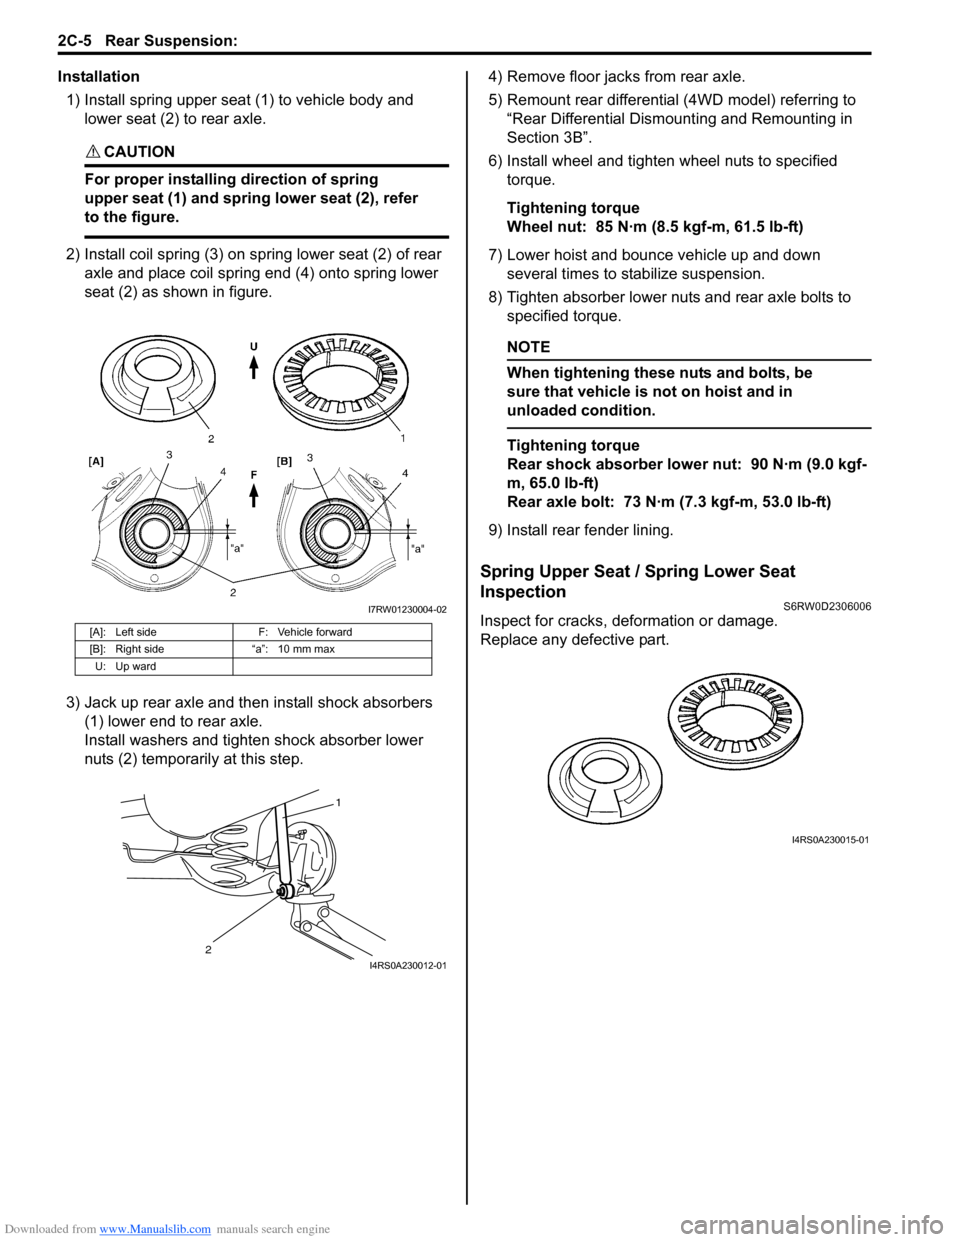 SUZUKI SX4 2006 1.G Service User Guide Downloaded from www.Manualslib.com manuals search engine 2C-5 Rear Suspension: 
Installation
1) Install spring upper seat (1) to vehicle body and 
lower seat (2) to rear axle.
CAUTION! 
For proper ins